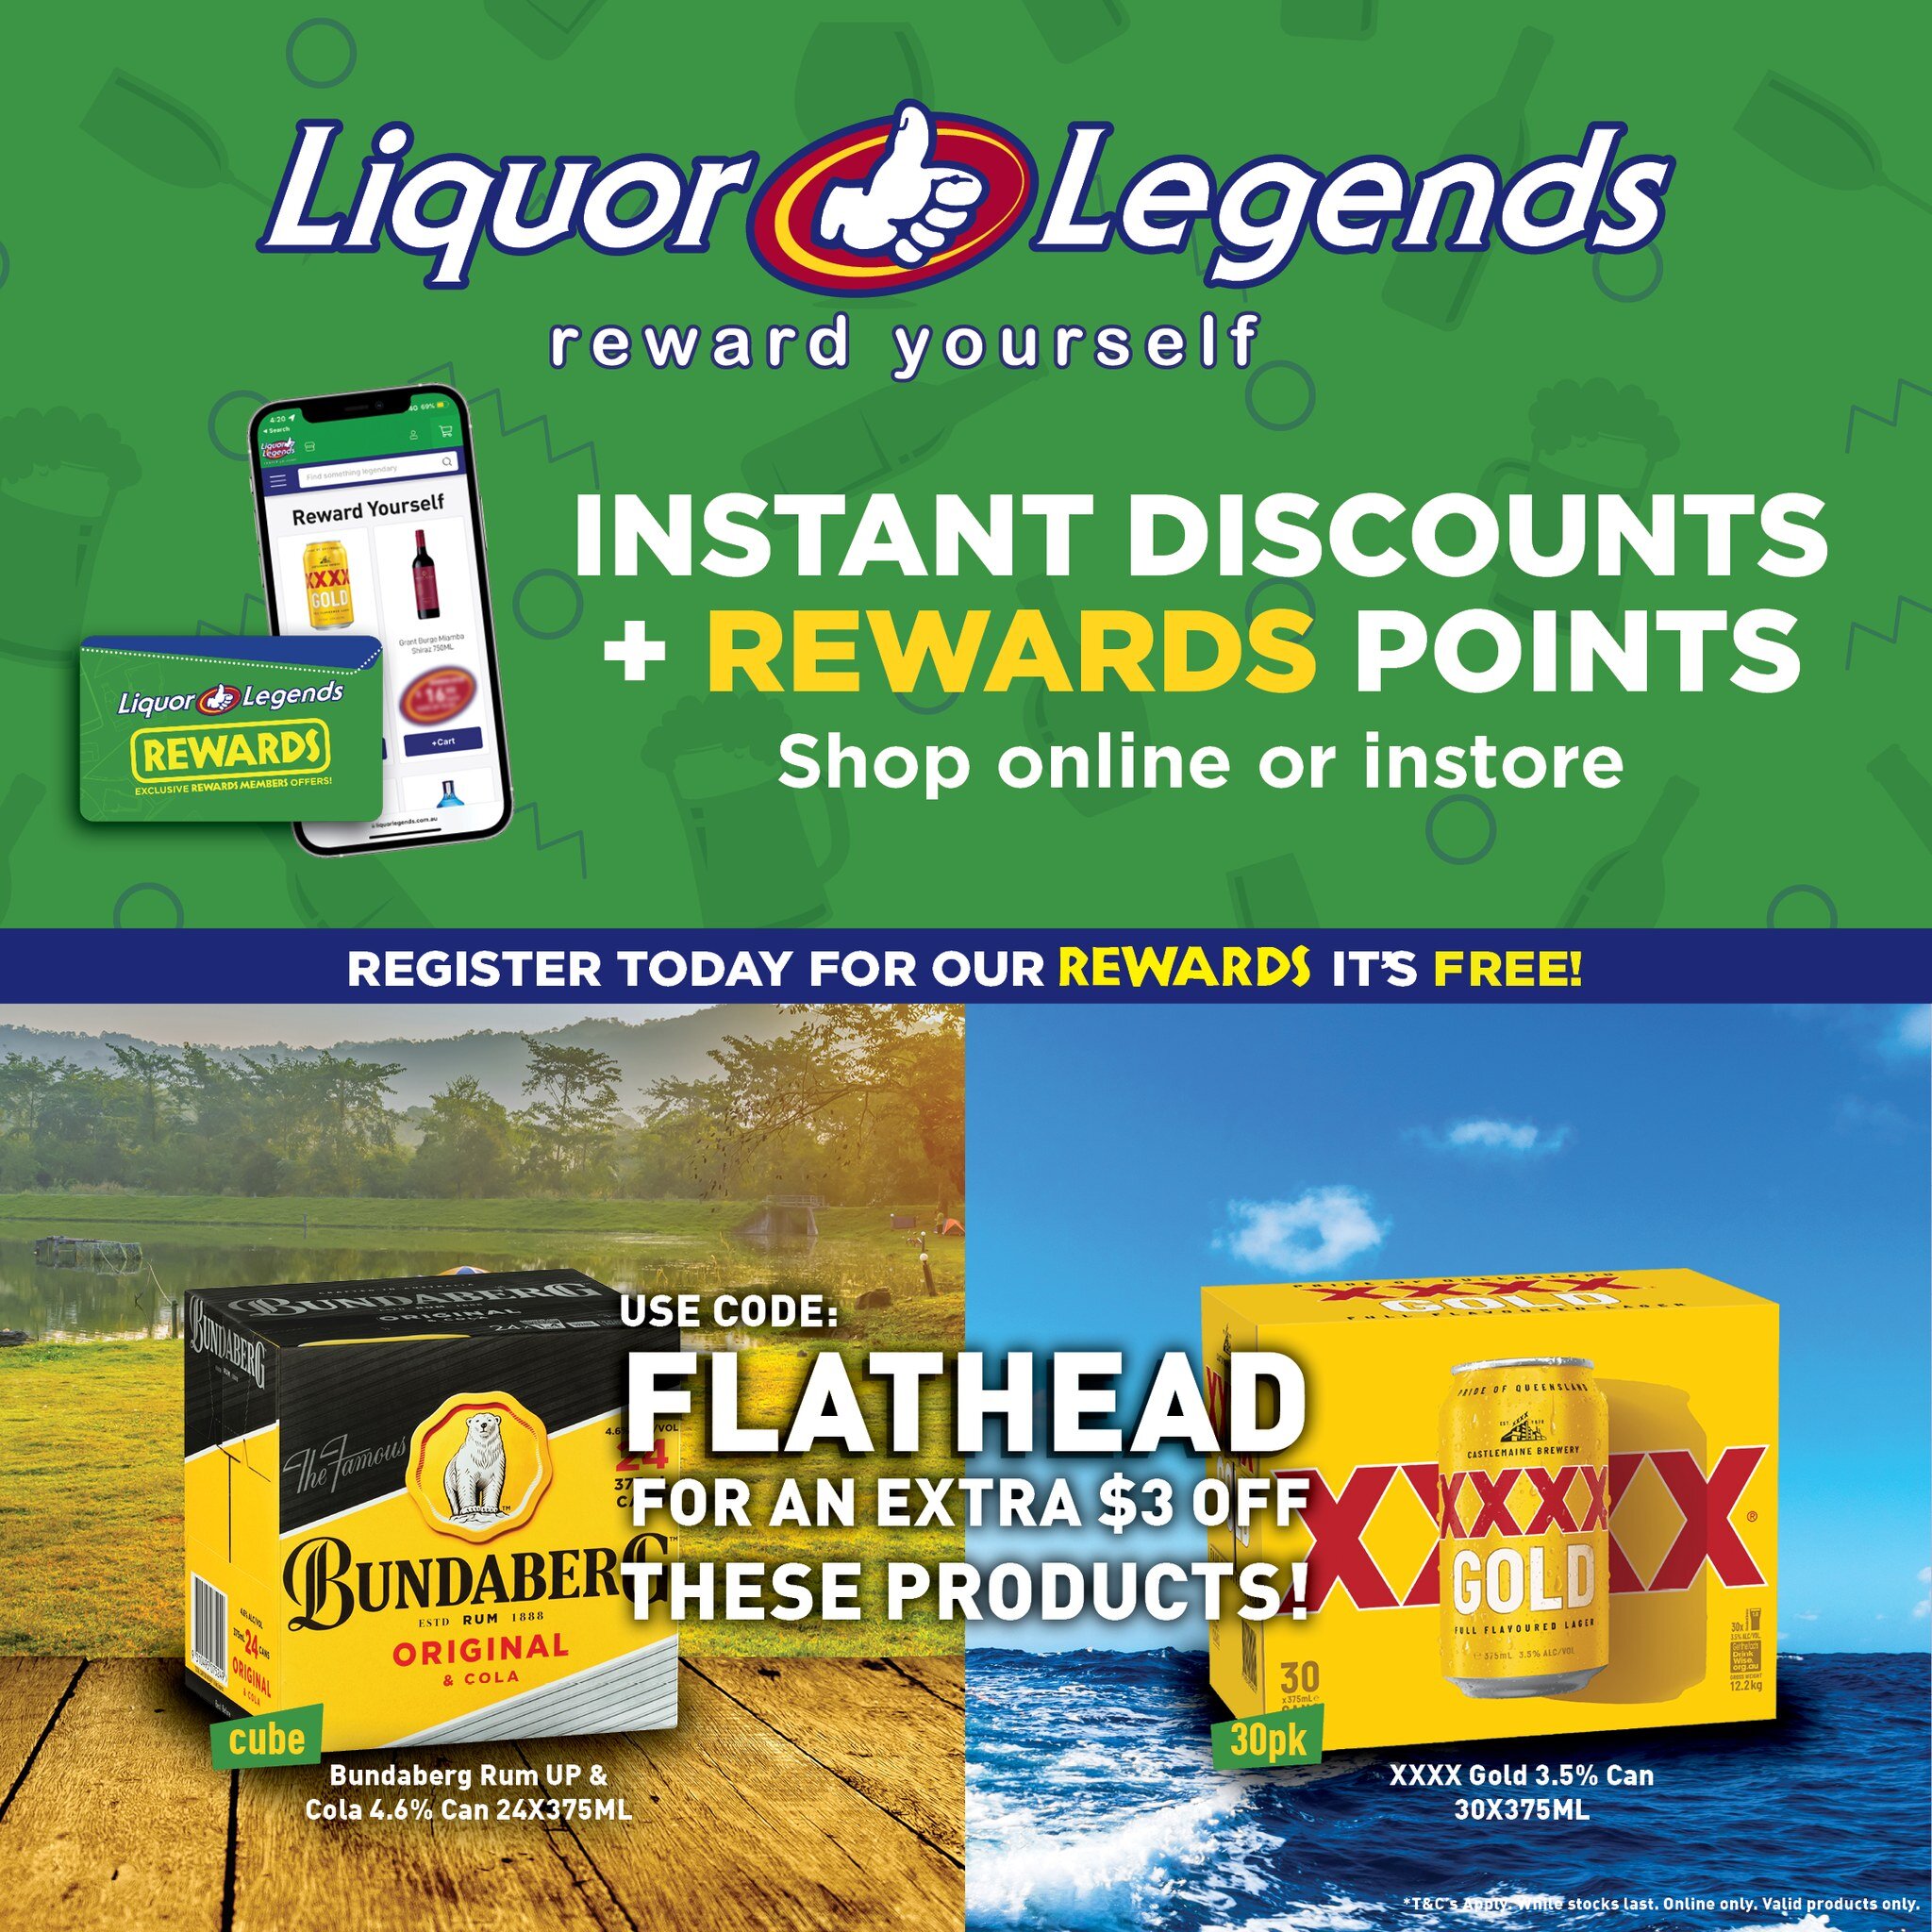 Check out this Register for Rewards offer from Gold sponsors Liquor Legends! Register today for instant discounts and rewards and use code FLATHEAD for an extra $3 off these products!
Sign up here: https://liquorlegends.com.au/register-for-rewards